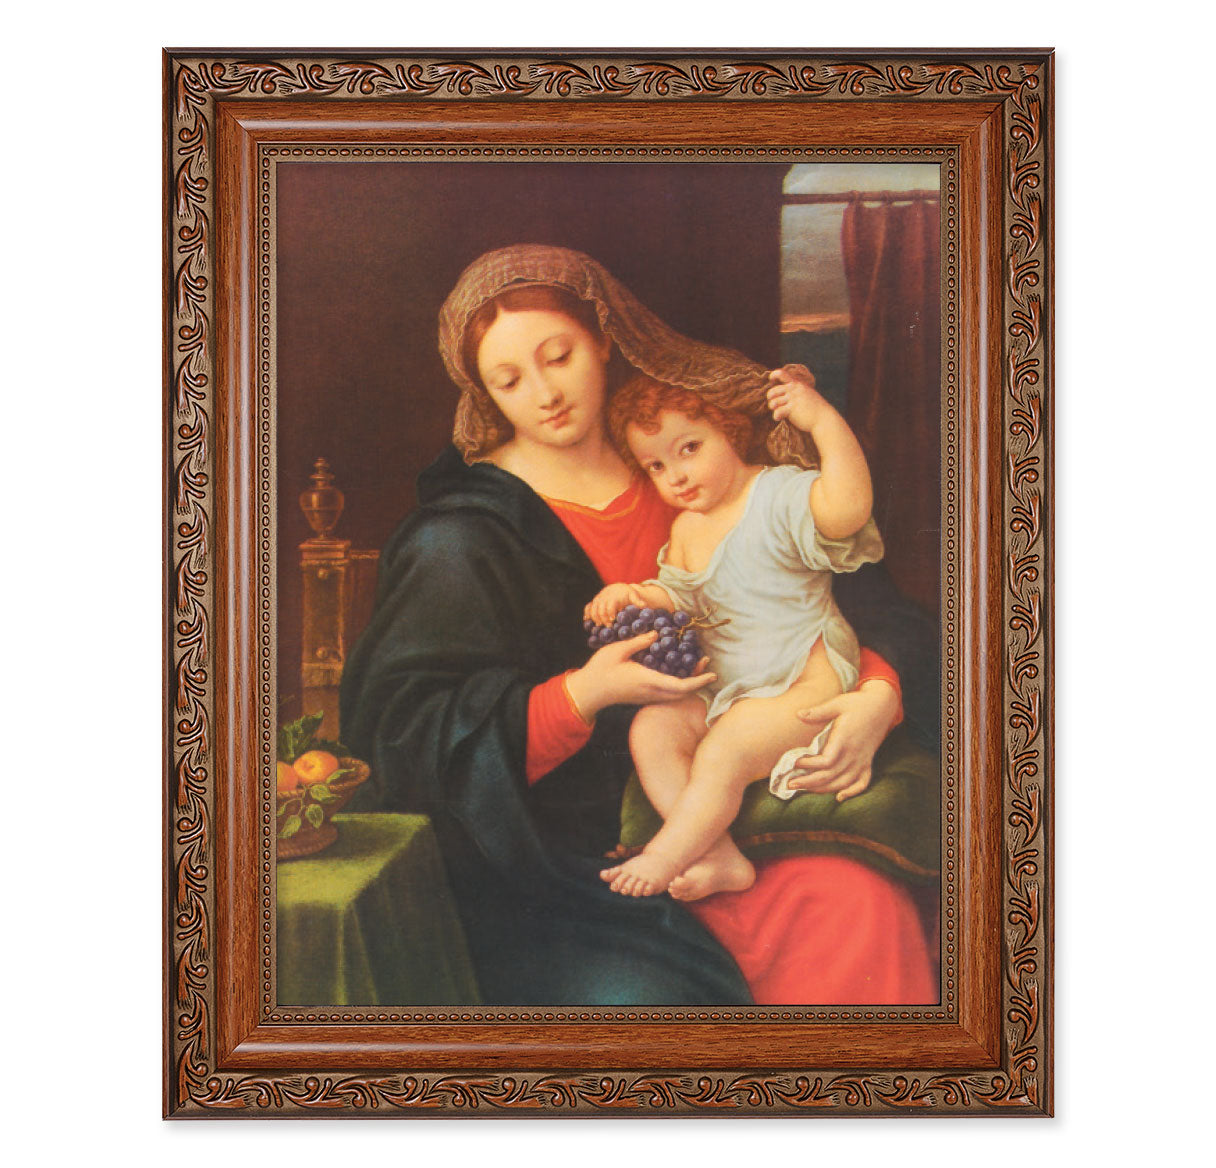 Madonna of the Grapes Mahogany Finished Framed Art